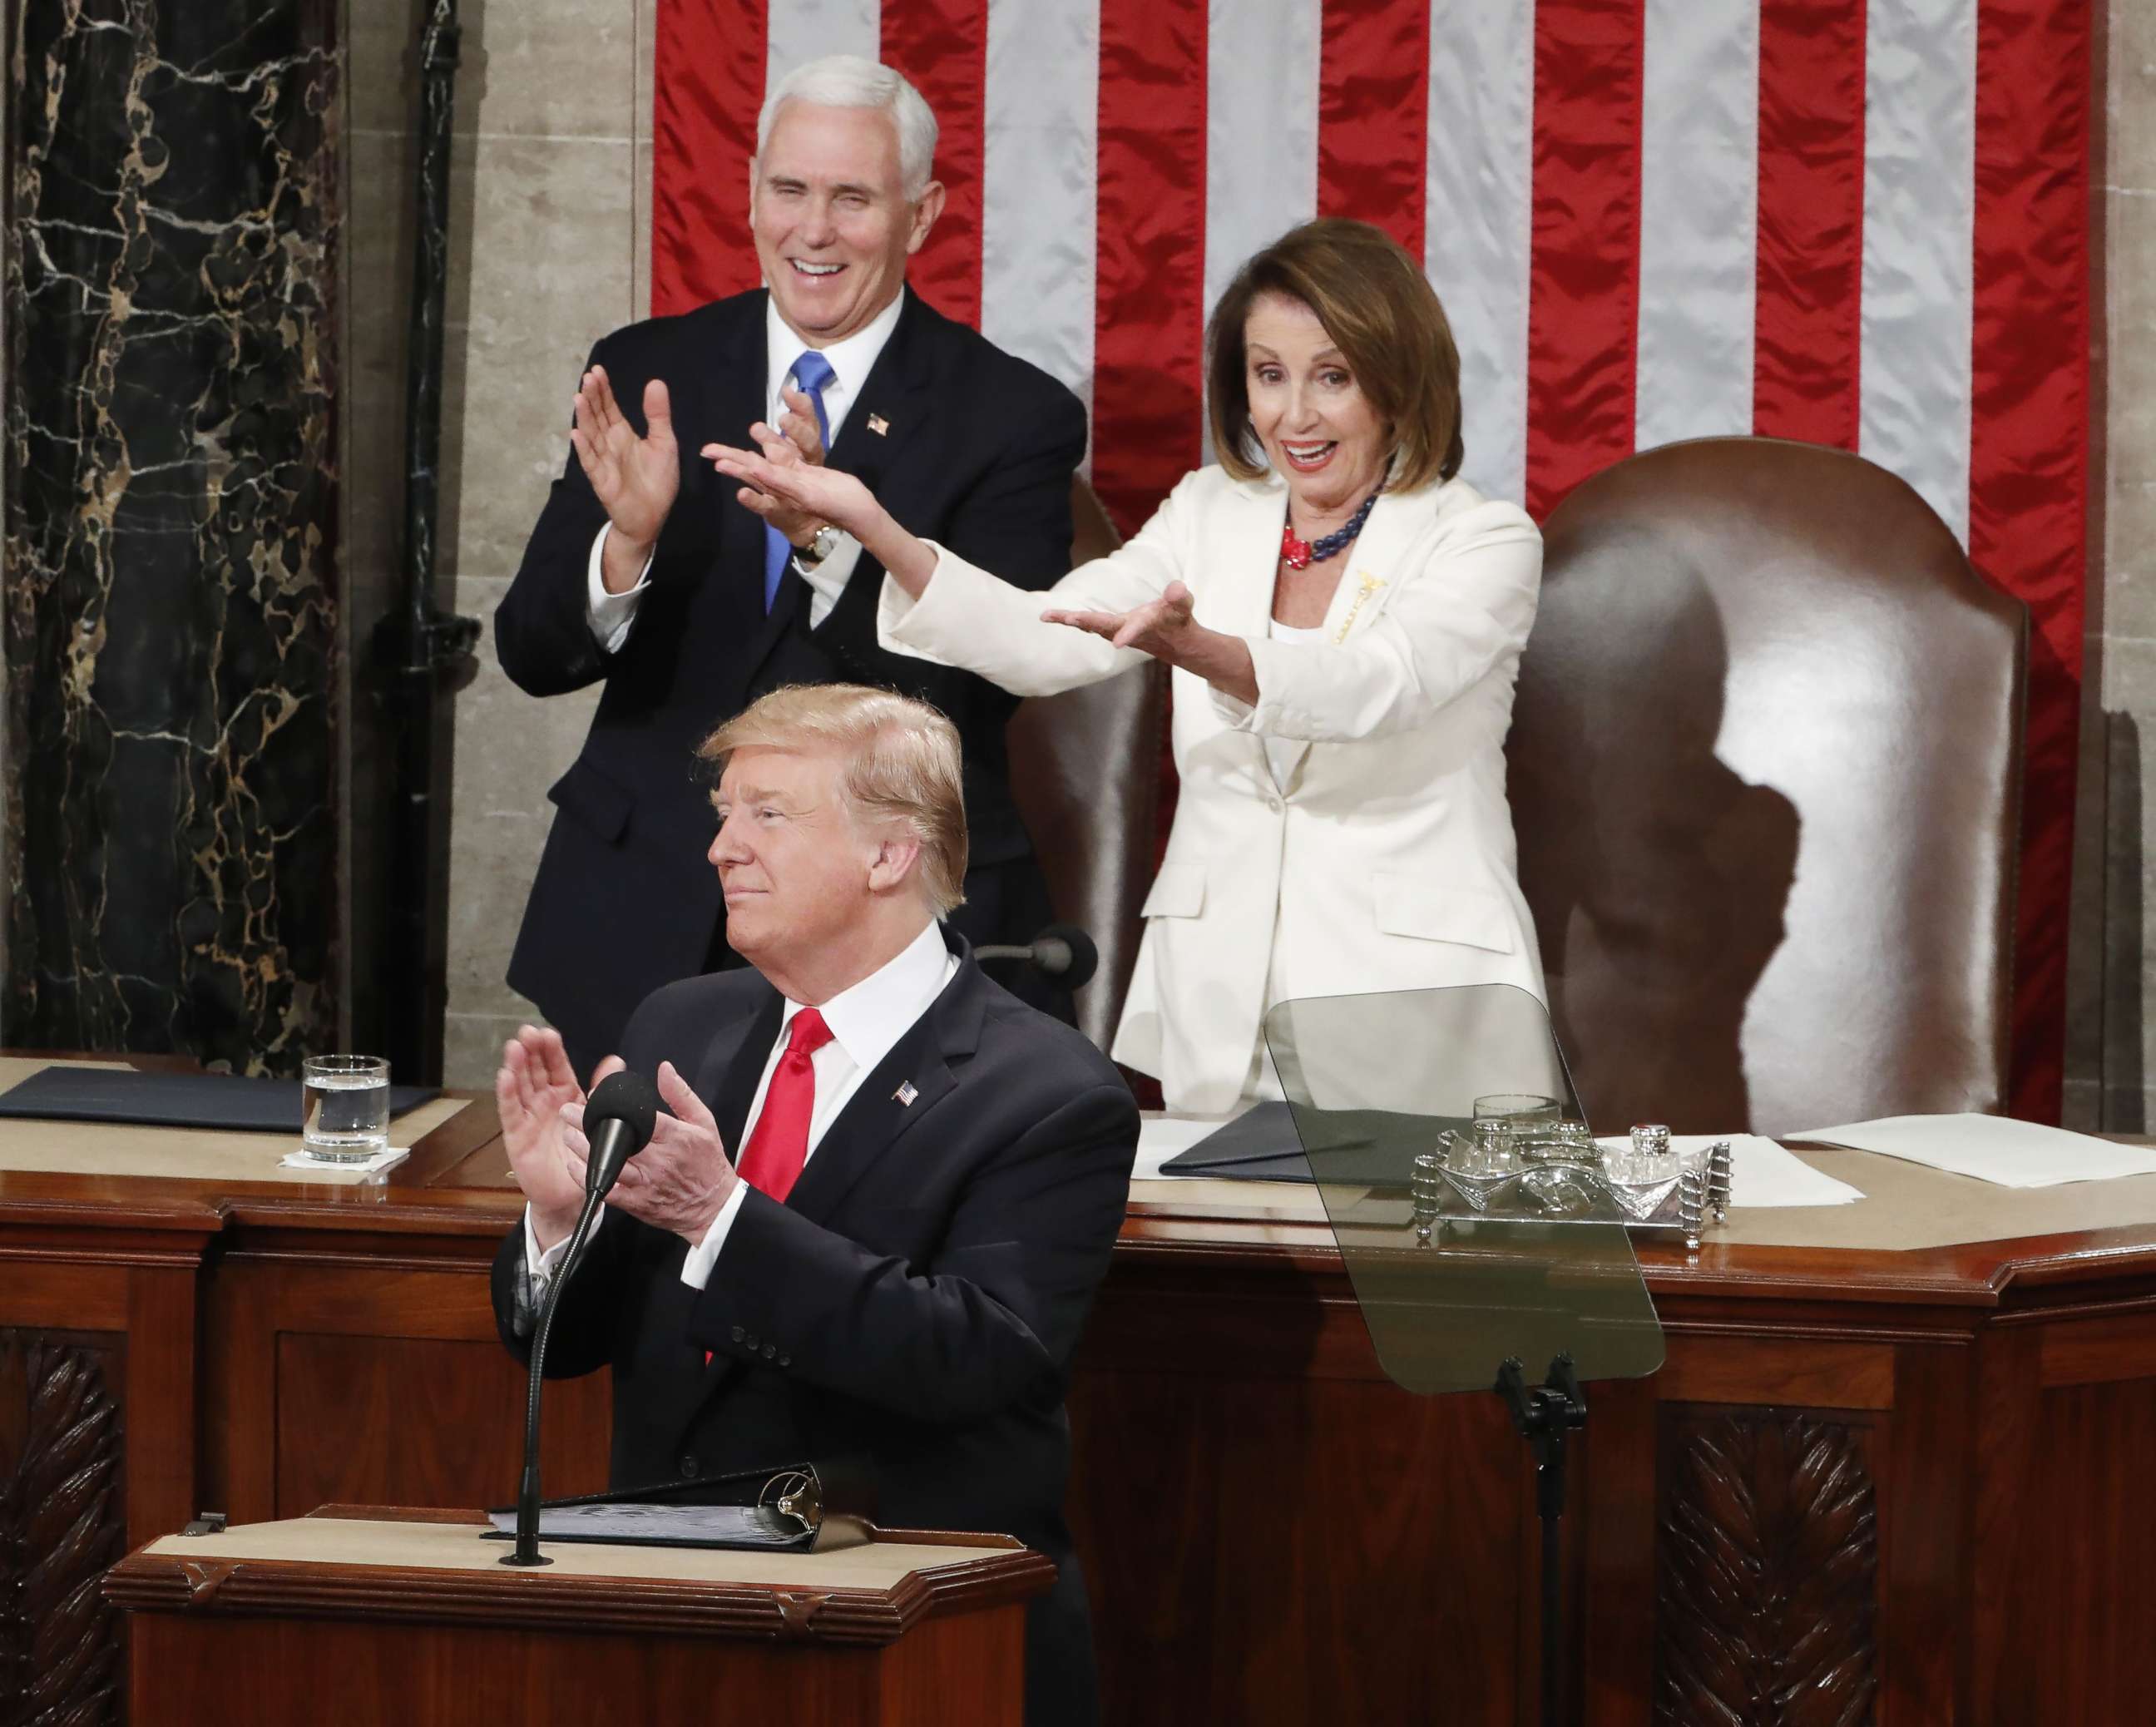 PHOTO: Vice president Mike Pence and Speaker of the House Nancy Pelosi react as President Donald J. Trump delivers his second State of the Union address from the floor of the House of Representatives on Capitol Hill in Washington, Feb. 5, 2019.